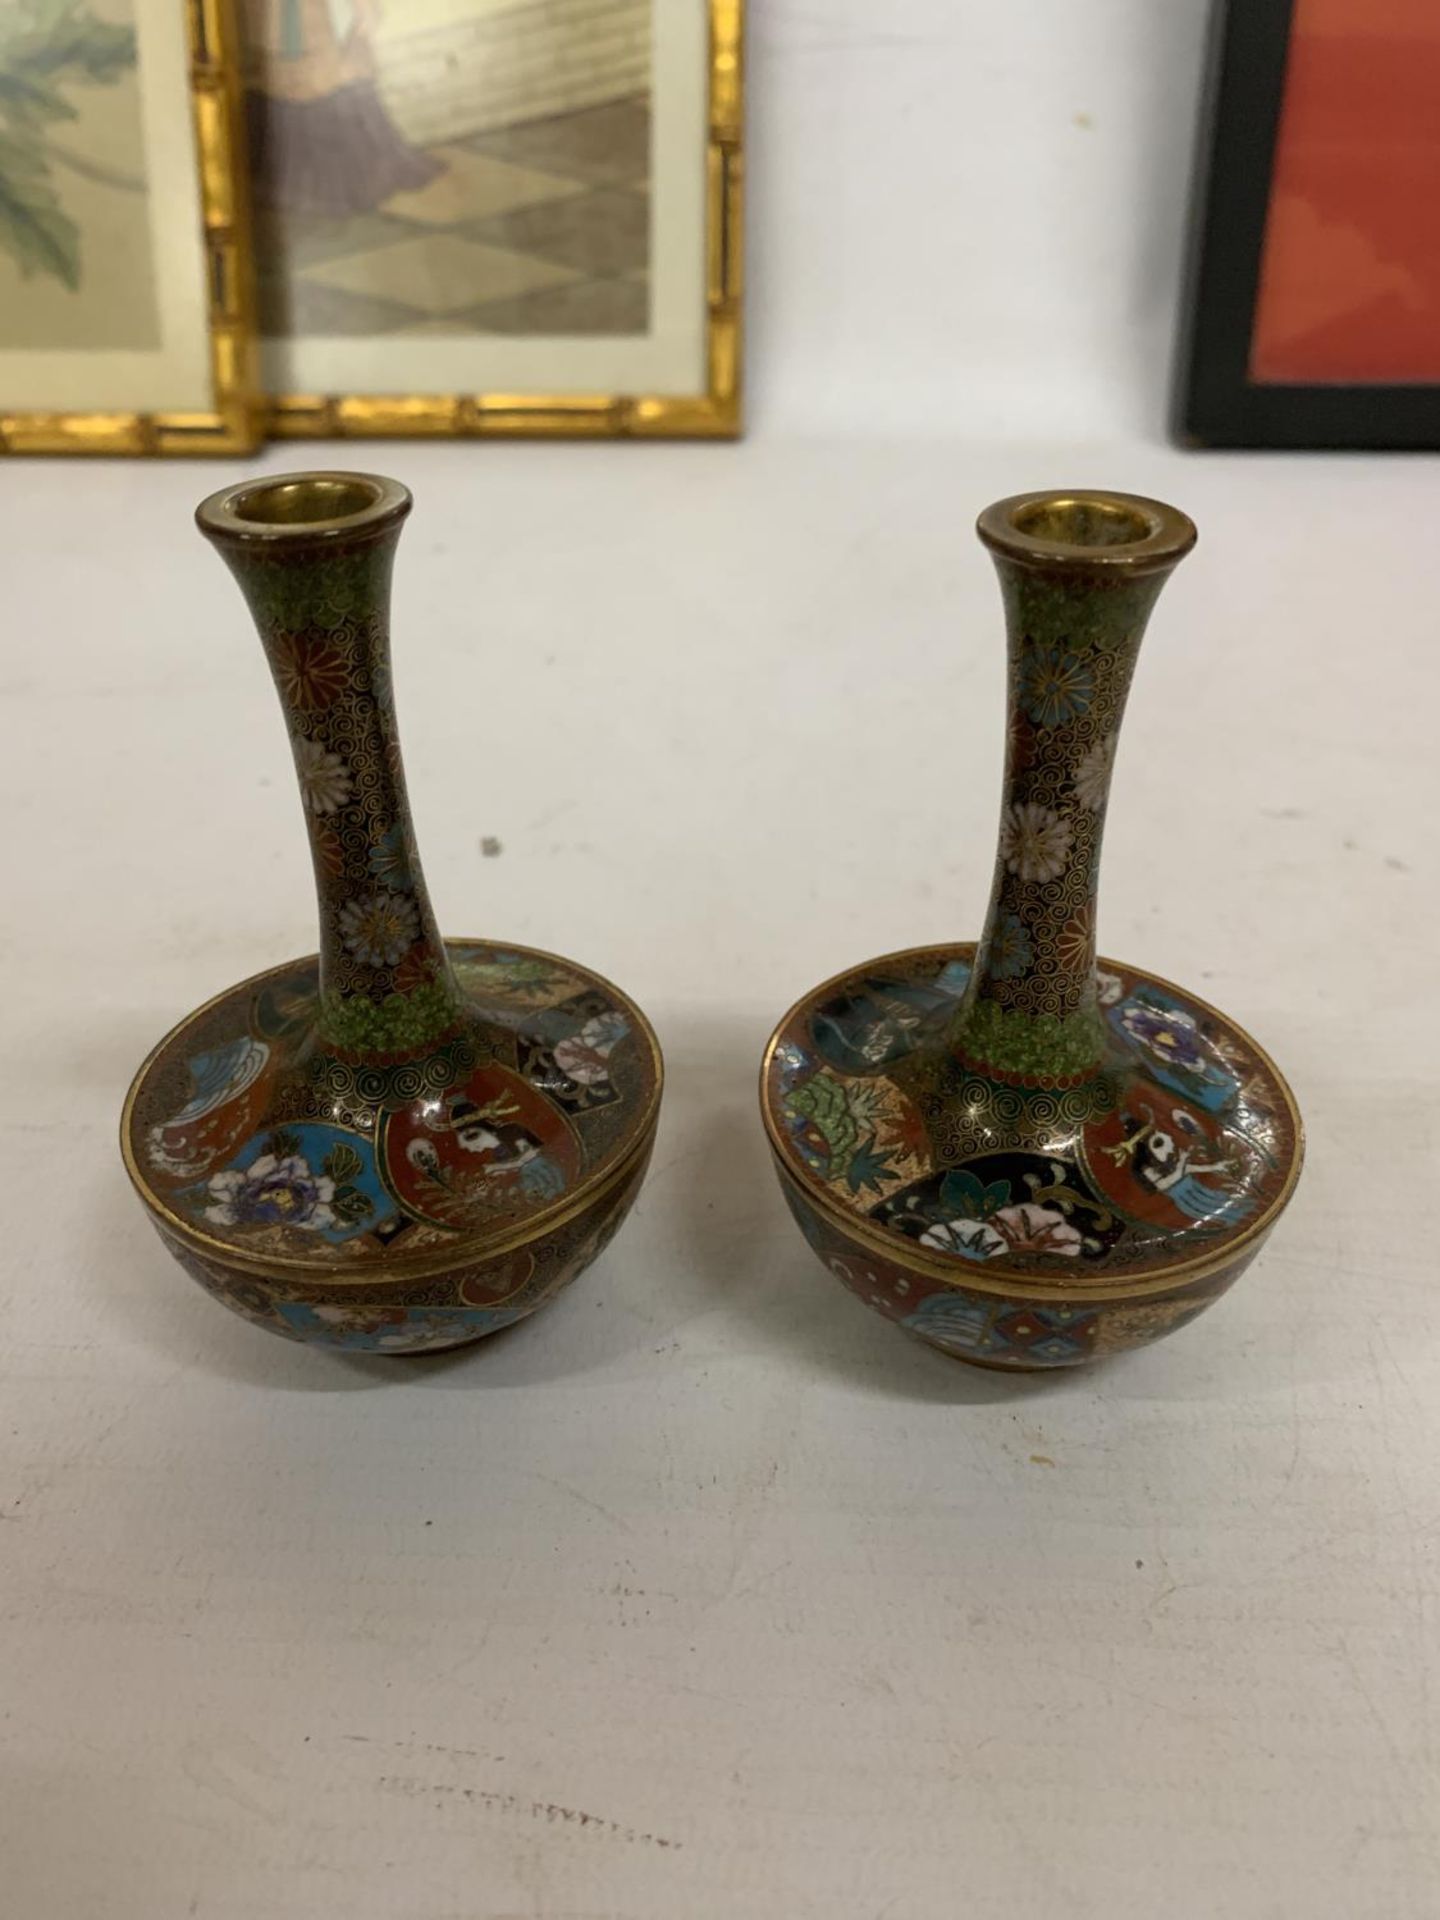 A PAIR OF CHINESE CLOISONNE ENAMEL BRASS VASES - 10 CM